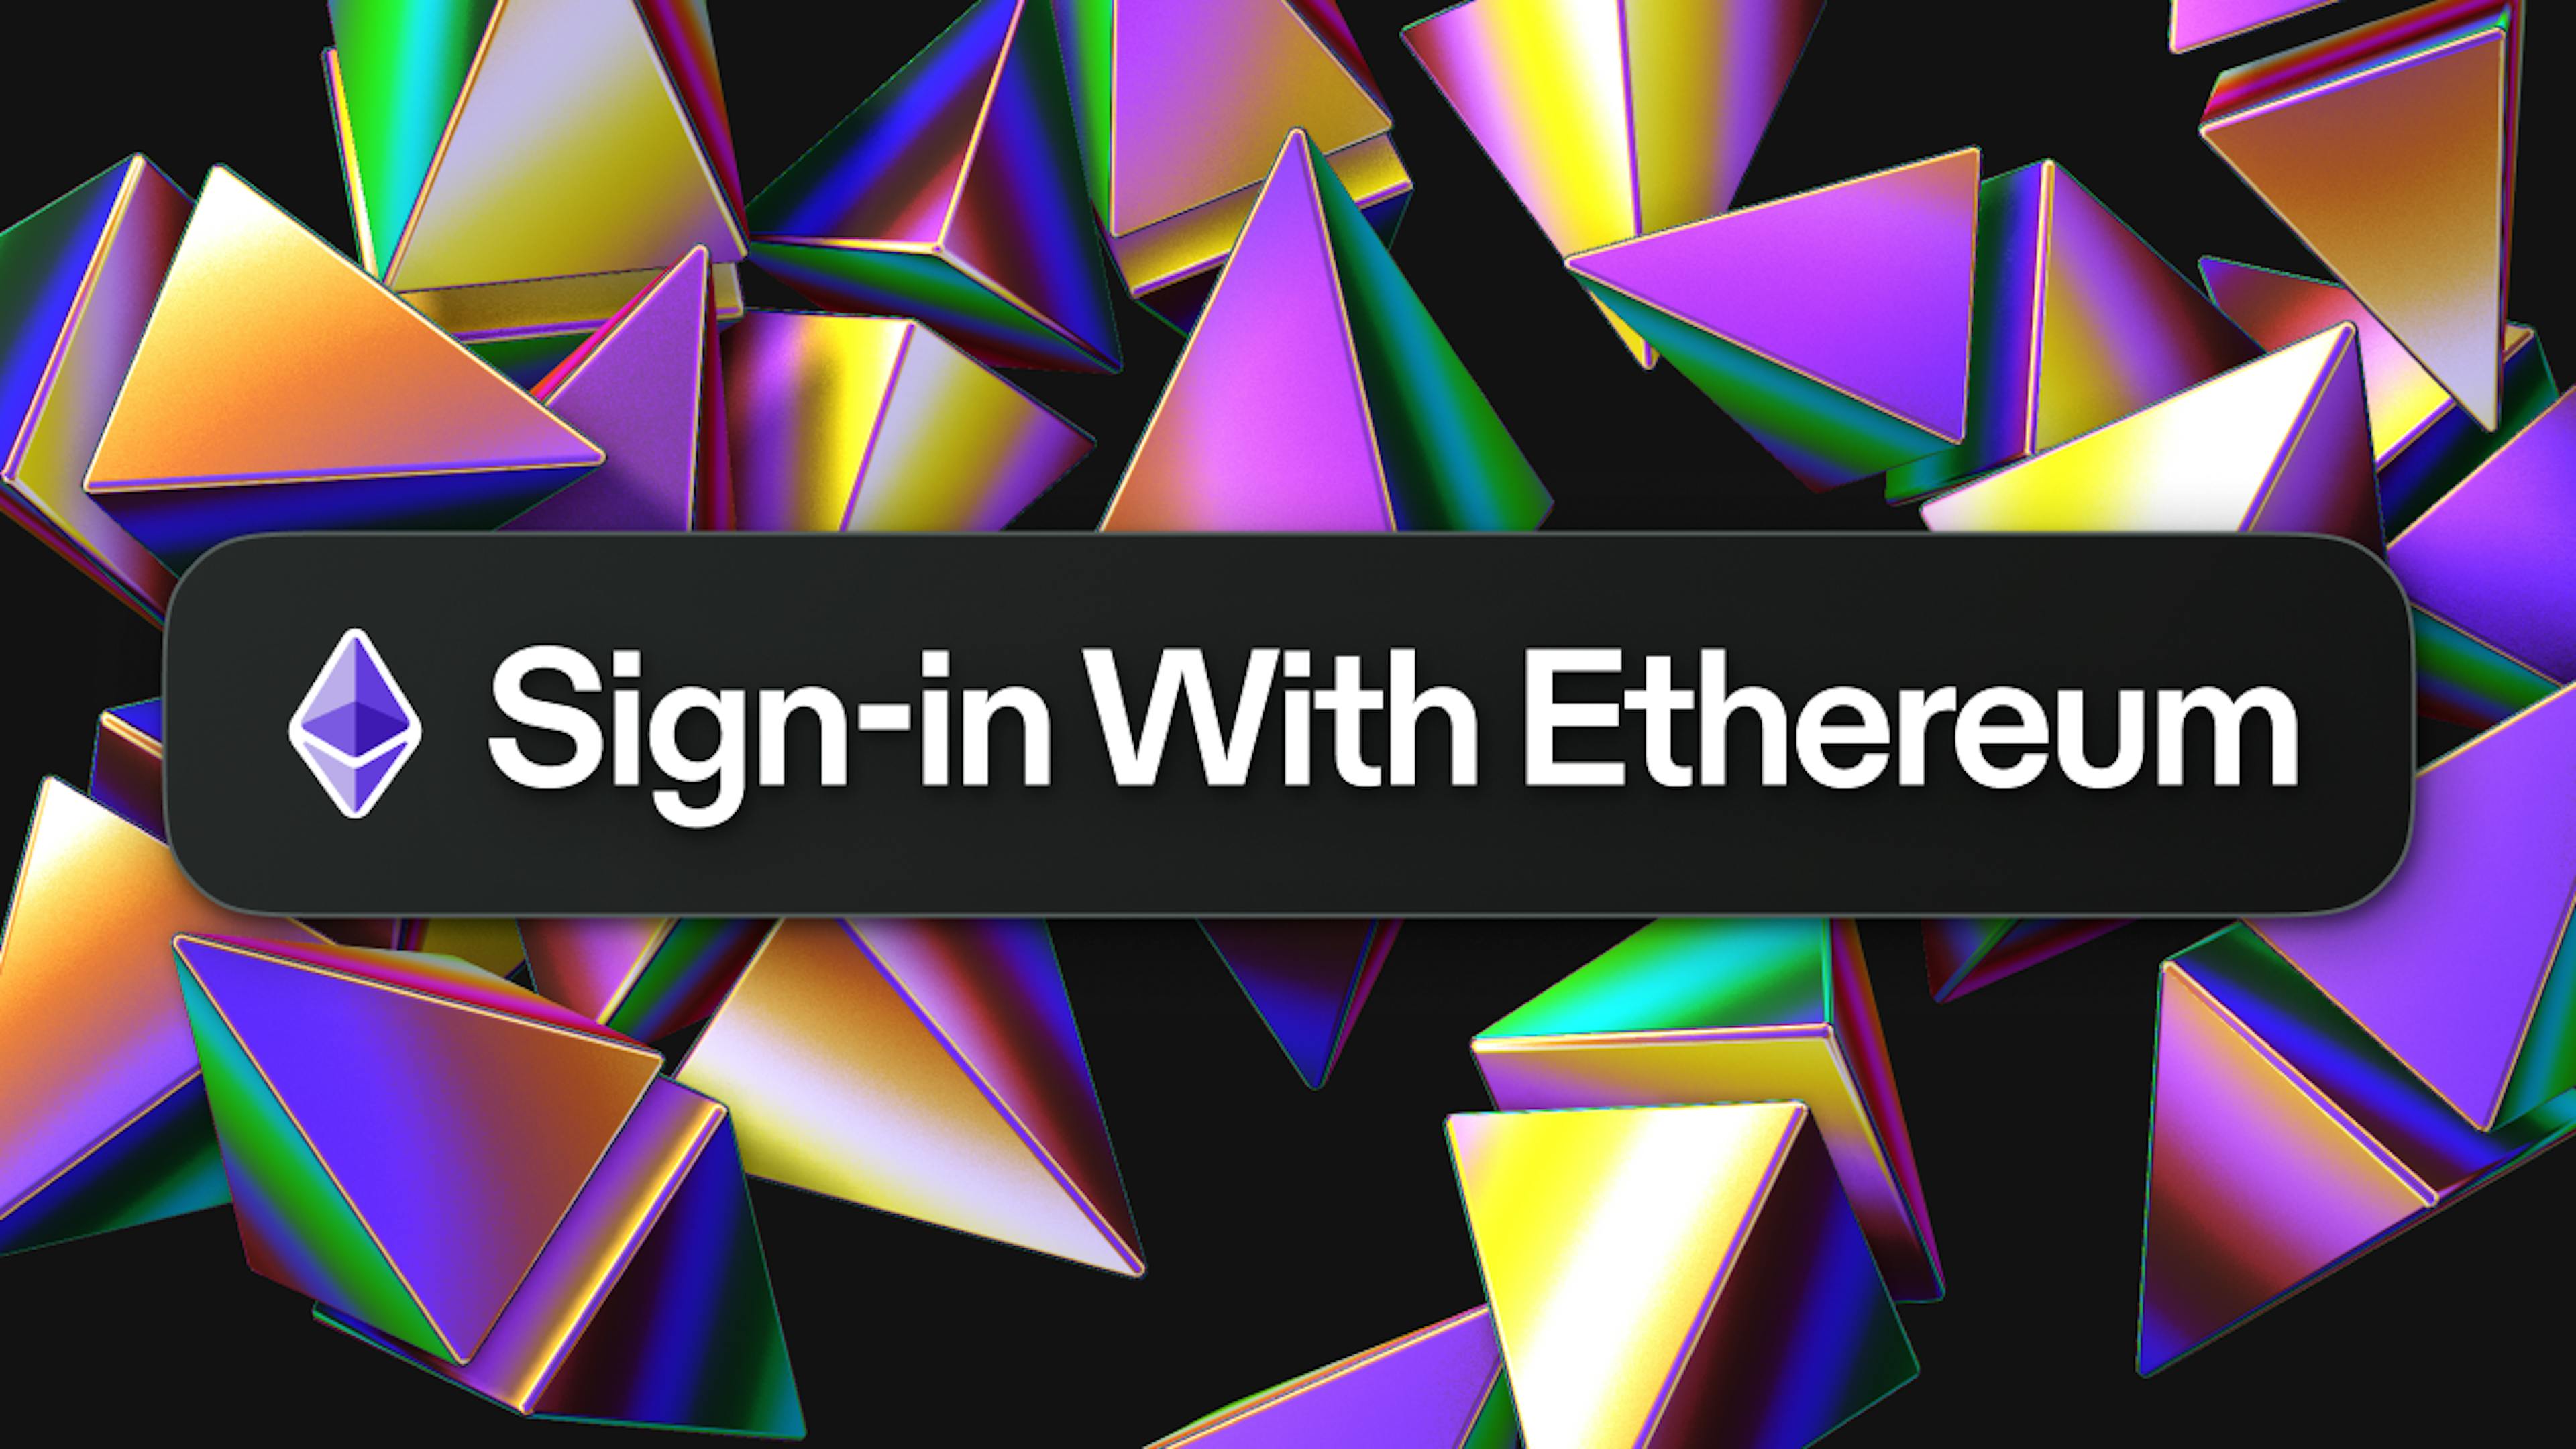 The Sign-in with Ethereum logo